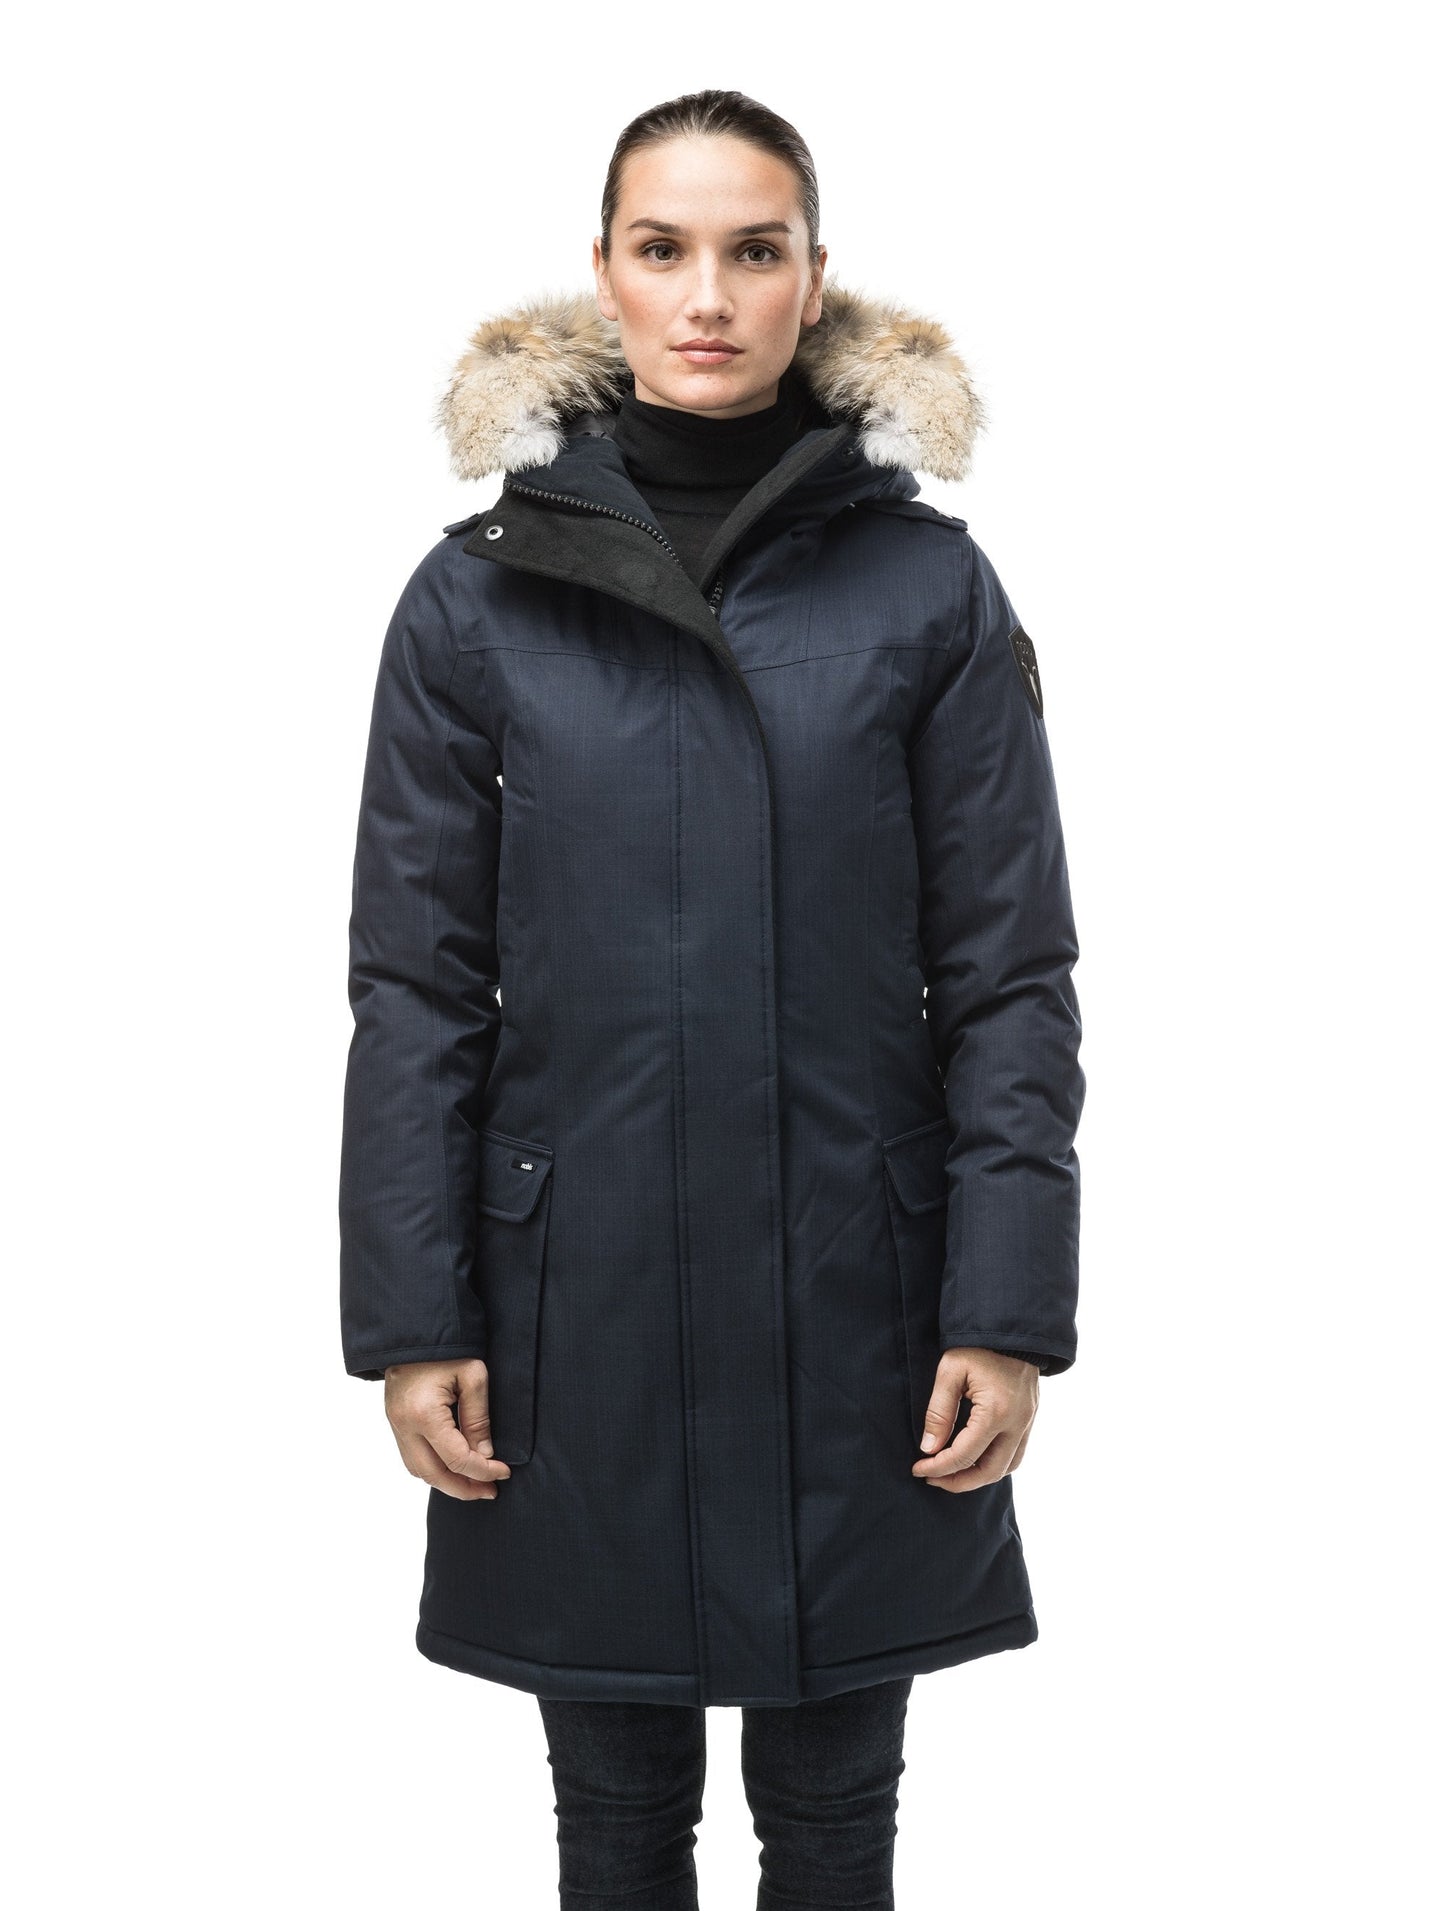 Women's knee length down filled parka with fur trim hood in CH Navy